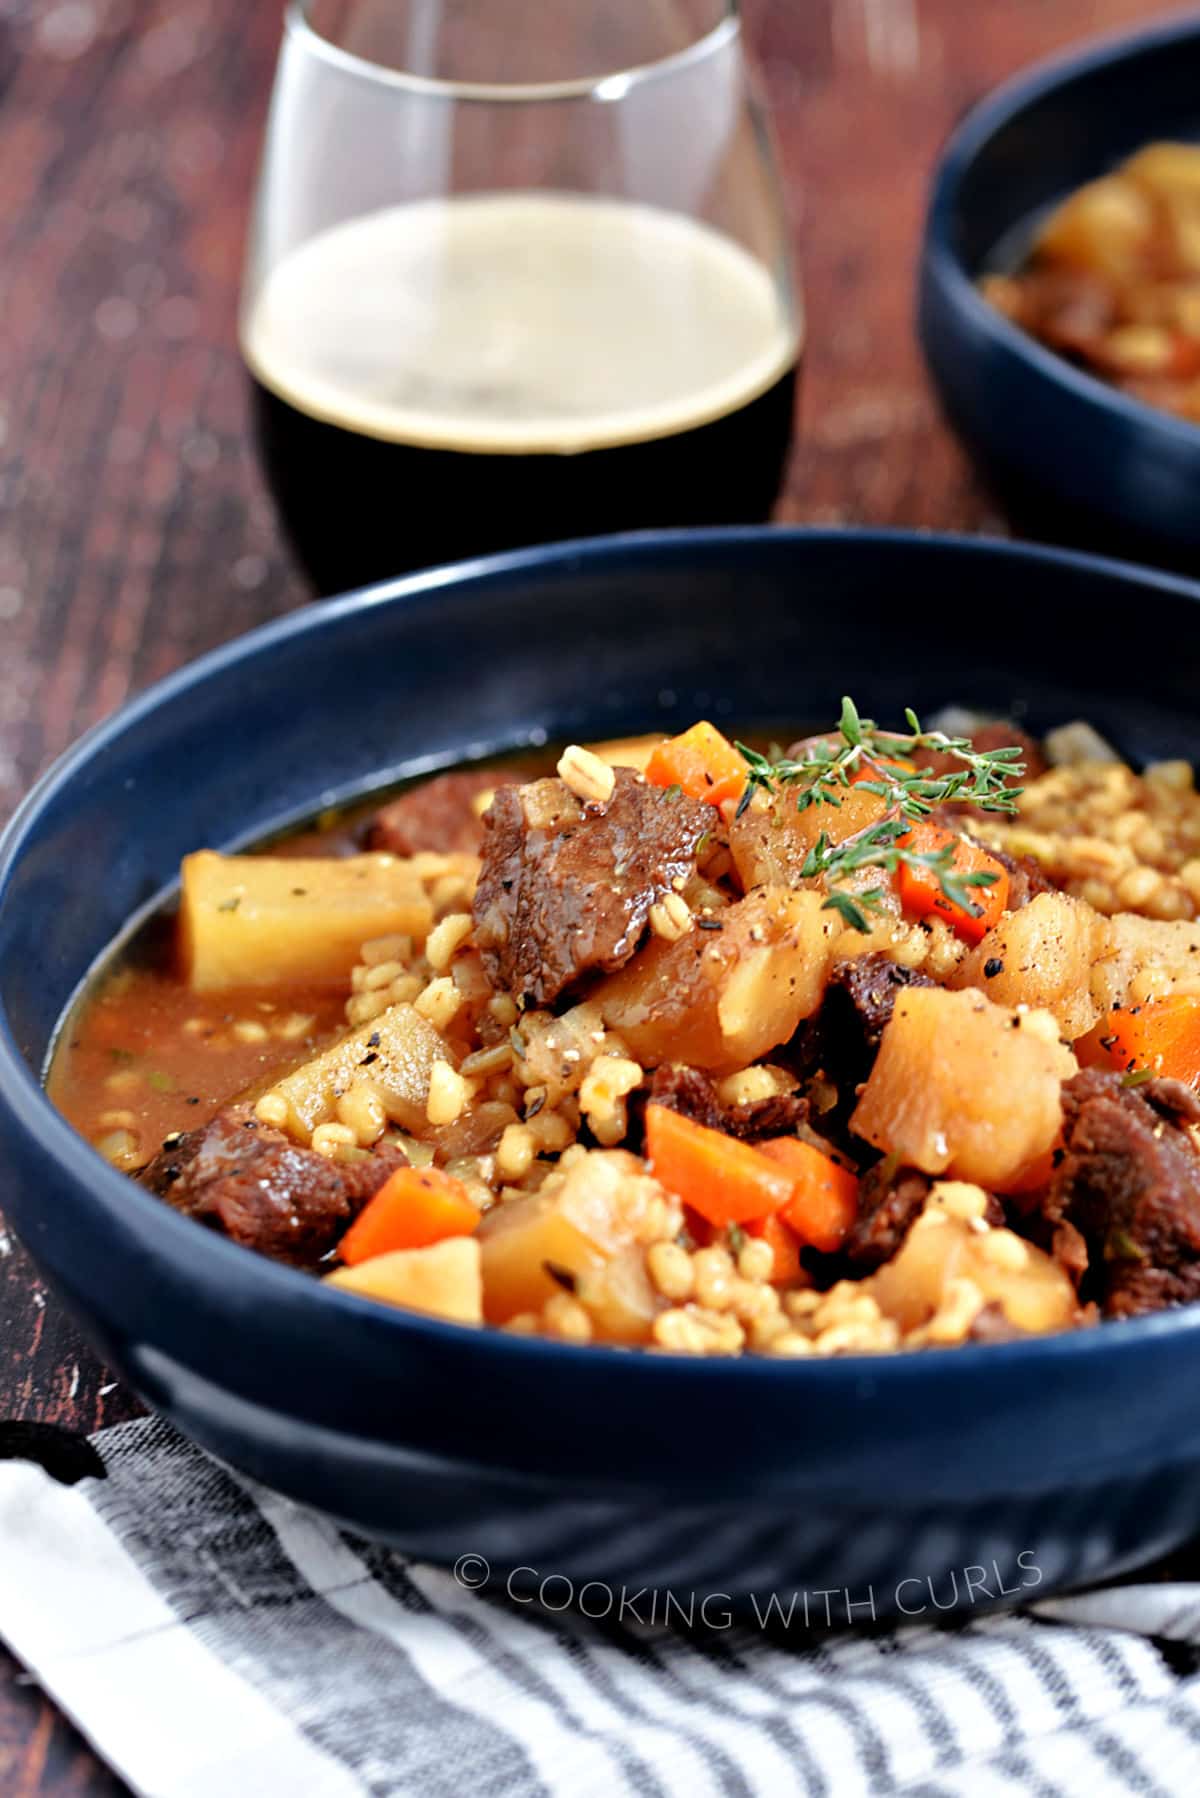 Large chunks of beef, potatoes and carrots surrounded by barley and broth in a blue bowl with a glass of Guinness in the background.